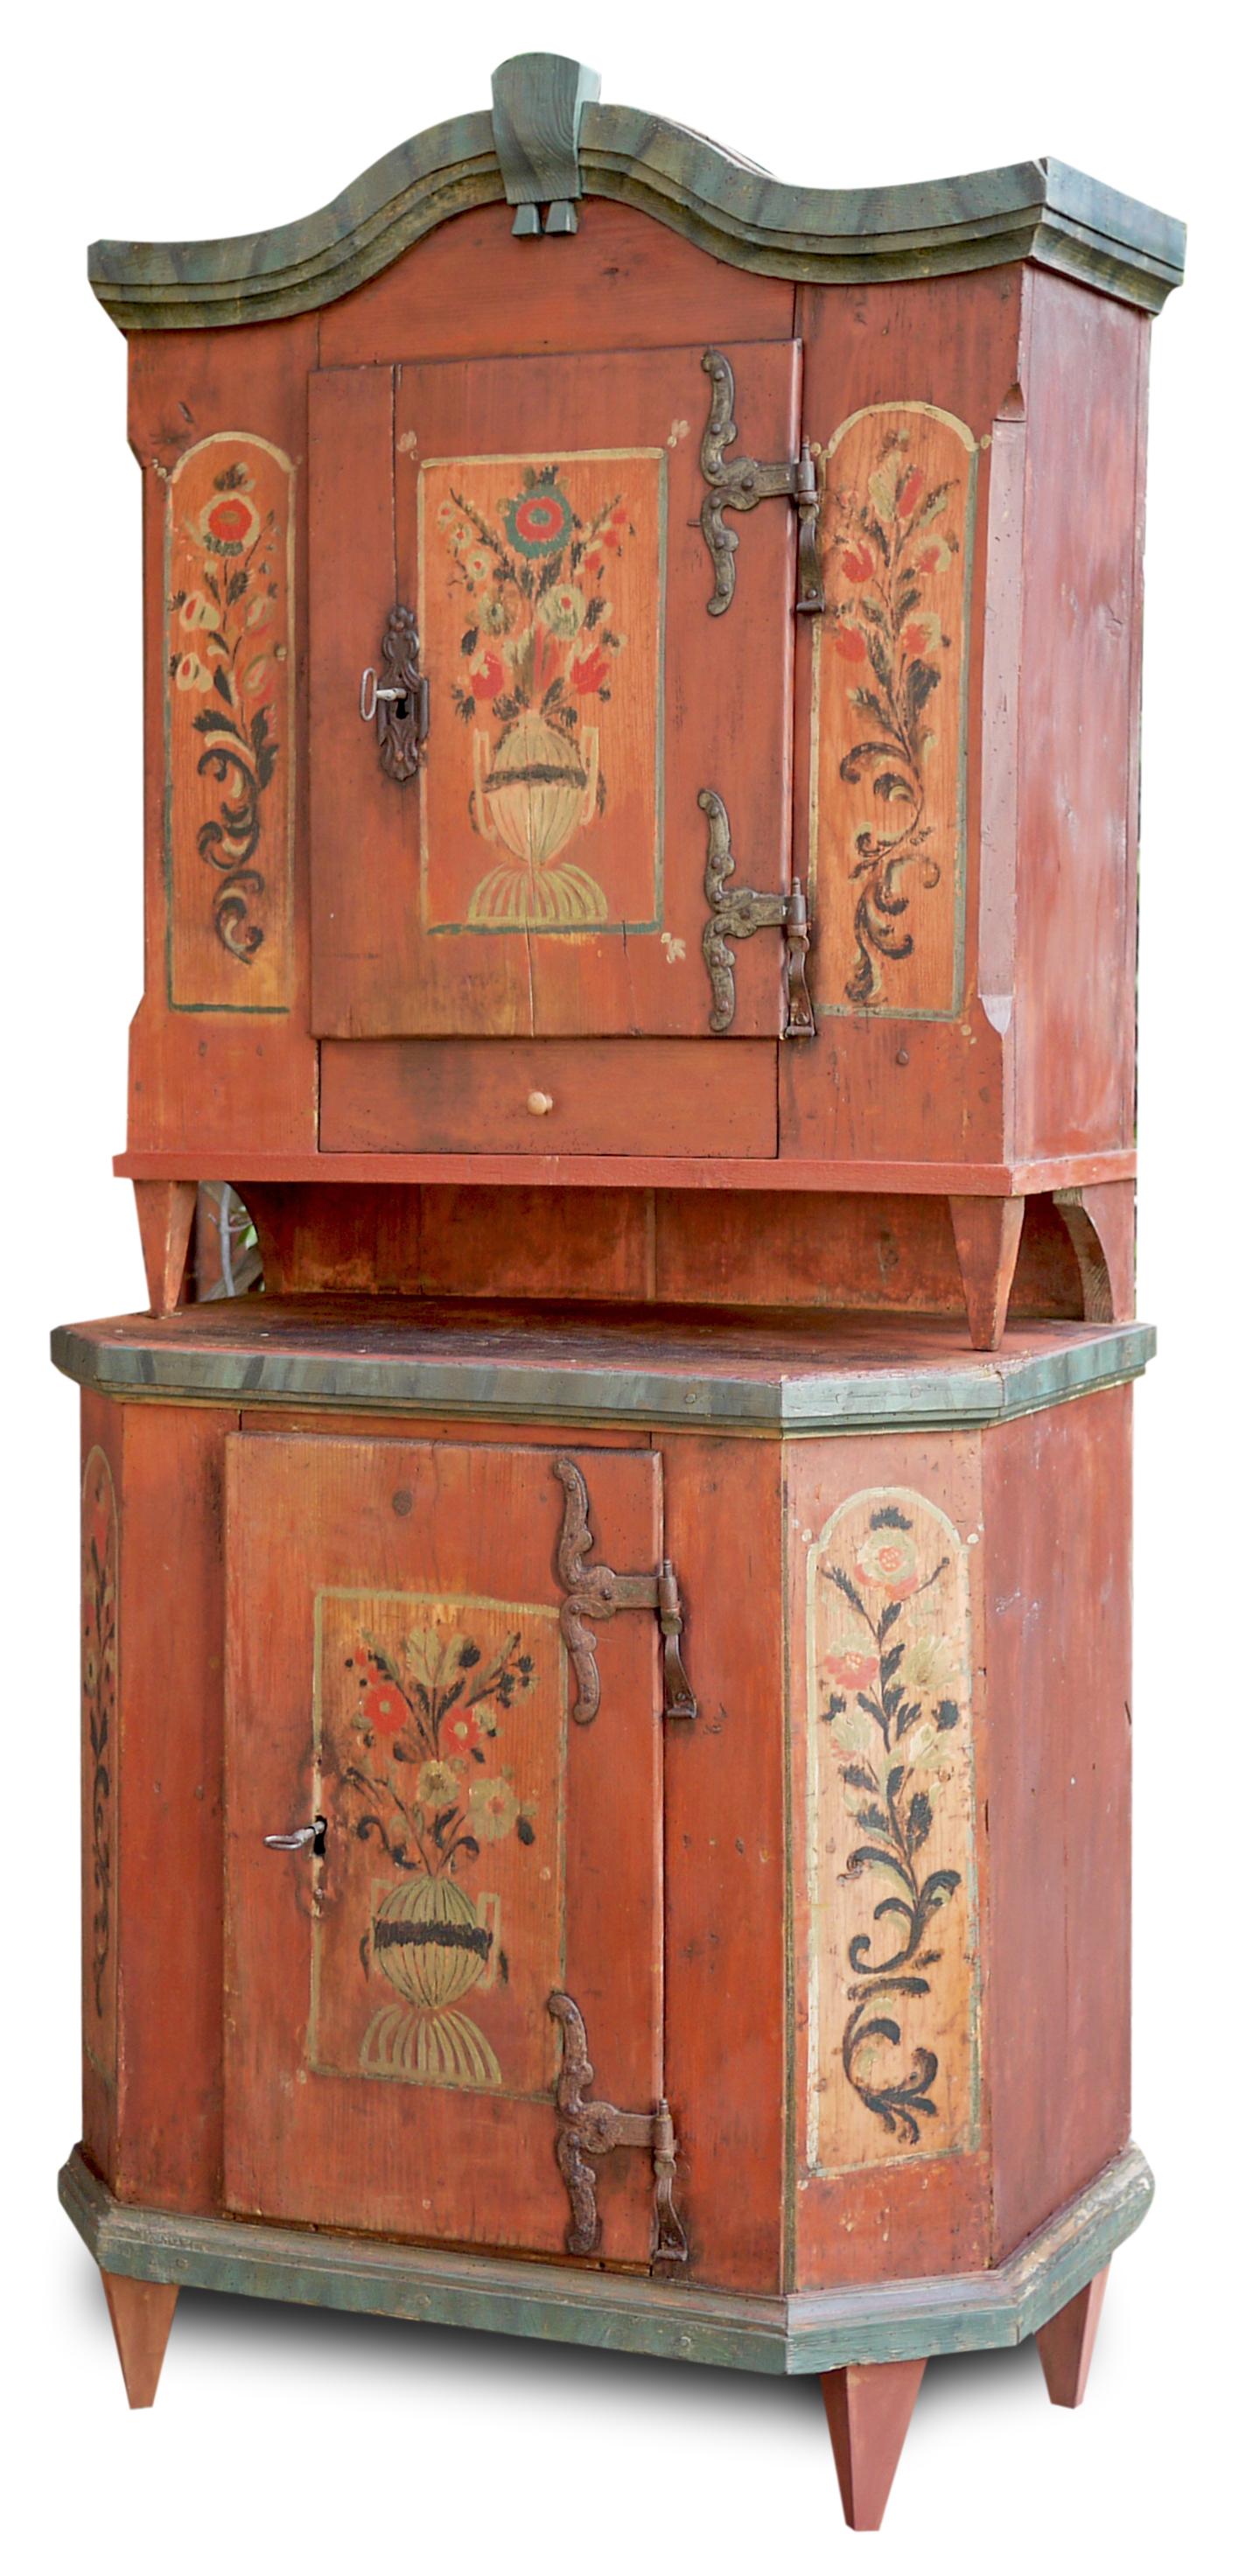 Sideboard, antique Tyrolean red painted cabinet - 19th century, Central Europe

Measures: H. 192 cm – L. 87 cm – P. 50 cm (82 cm to the frames)

Two-body sideboard entirely painted in rust red.

The front is decorated with cups and garlands of